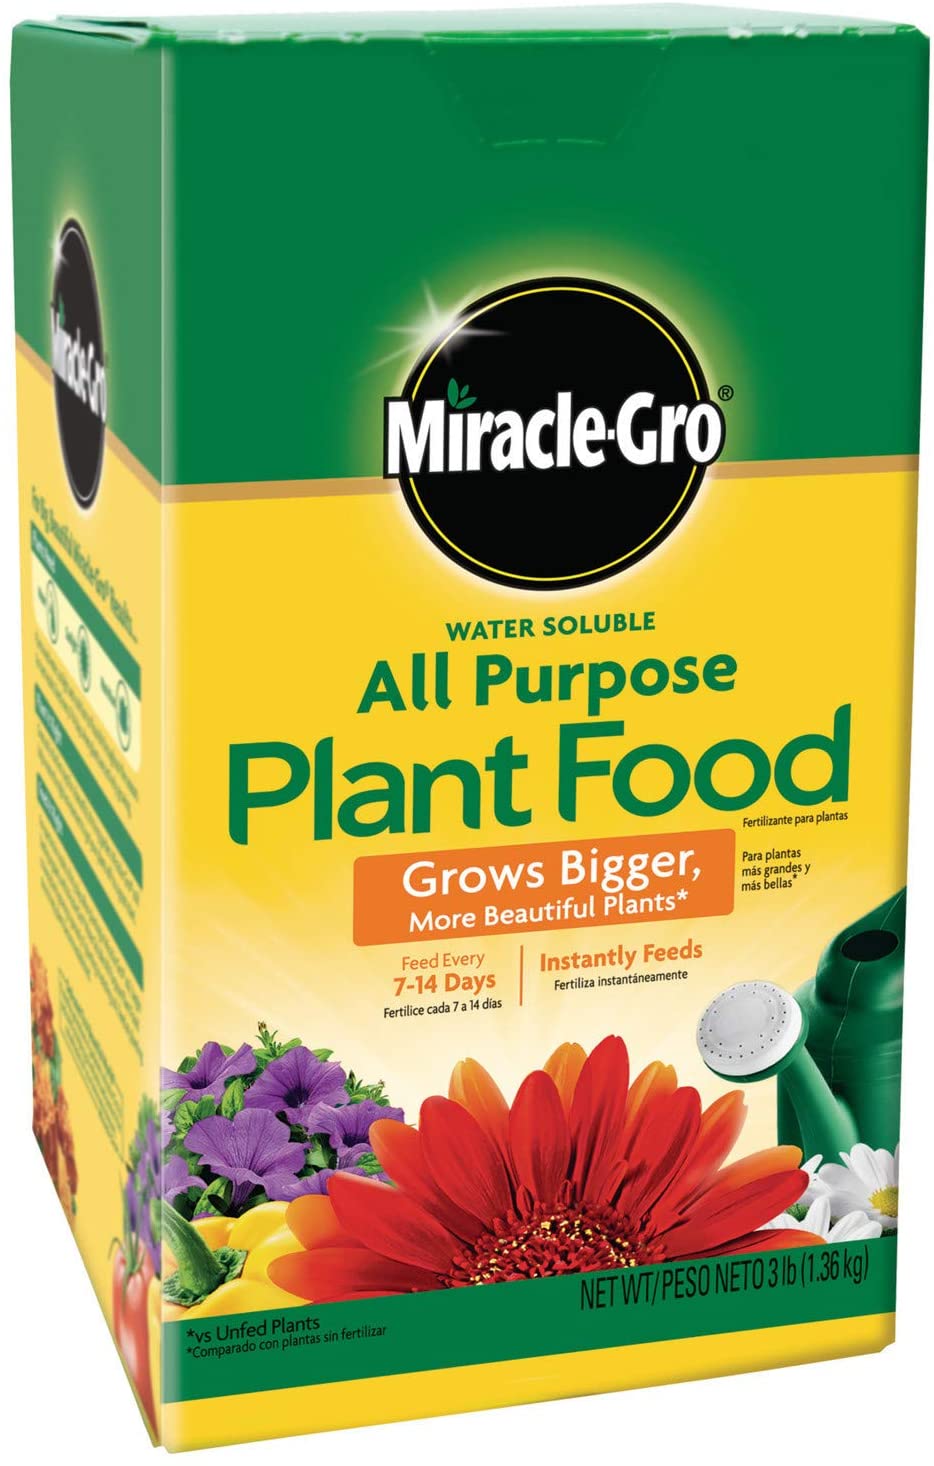 Prime Members: 3-lb. Miracle-Gro Water Soluble All Purpose Plant Food - $7.99 + More Lawn Care Products for up to 40% Off